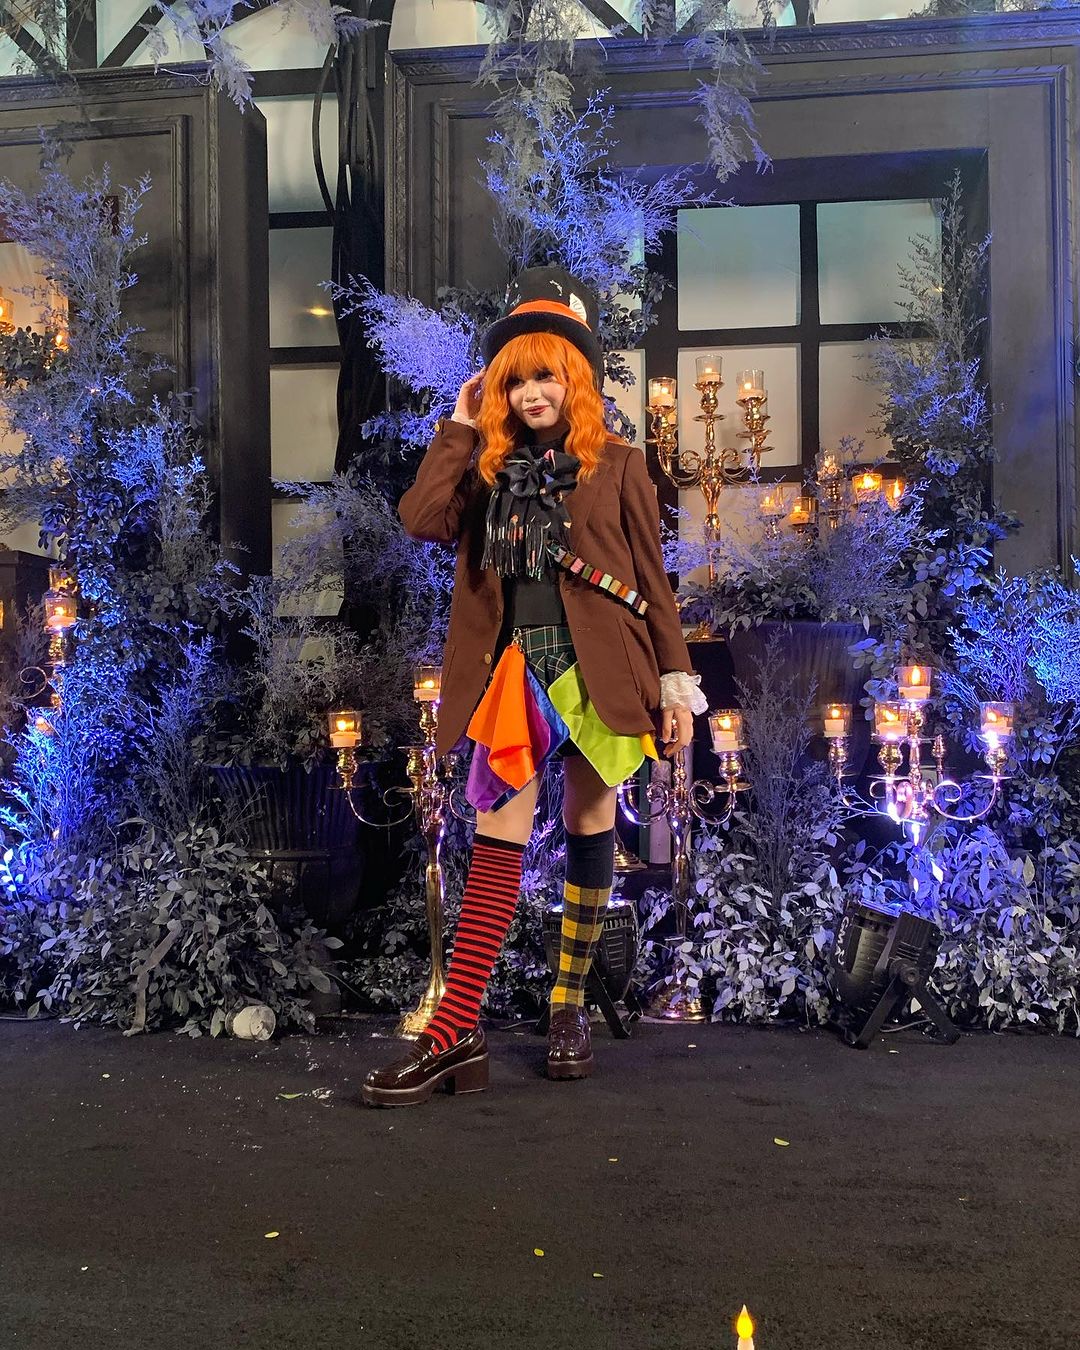 ASHLEY SARMIENTO AS MAD HATTER